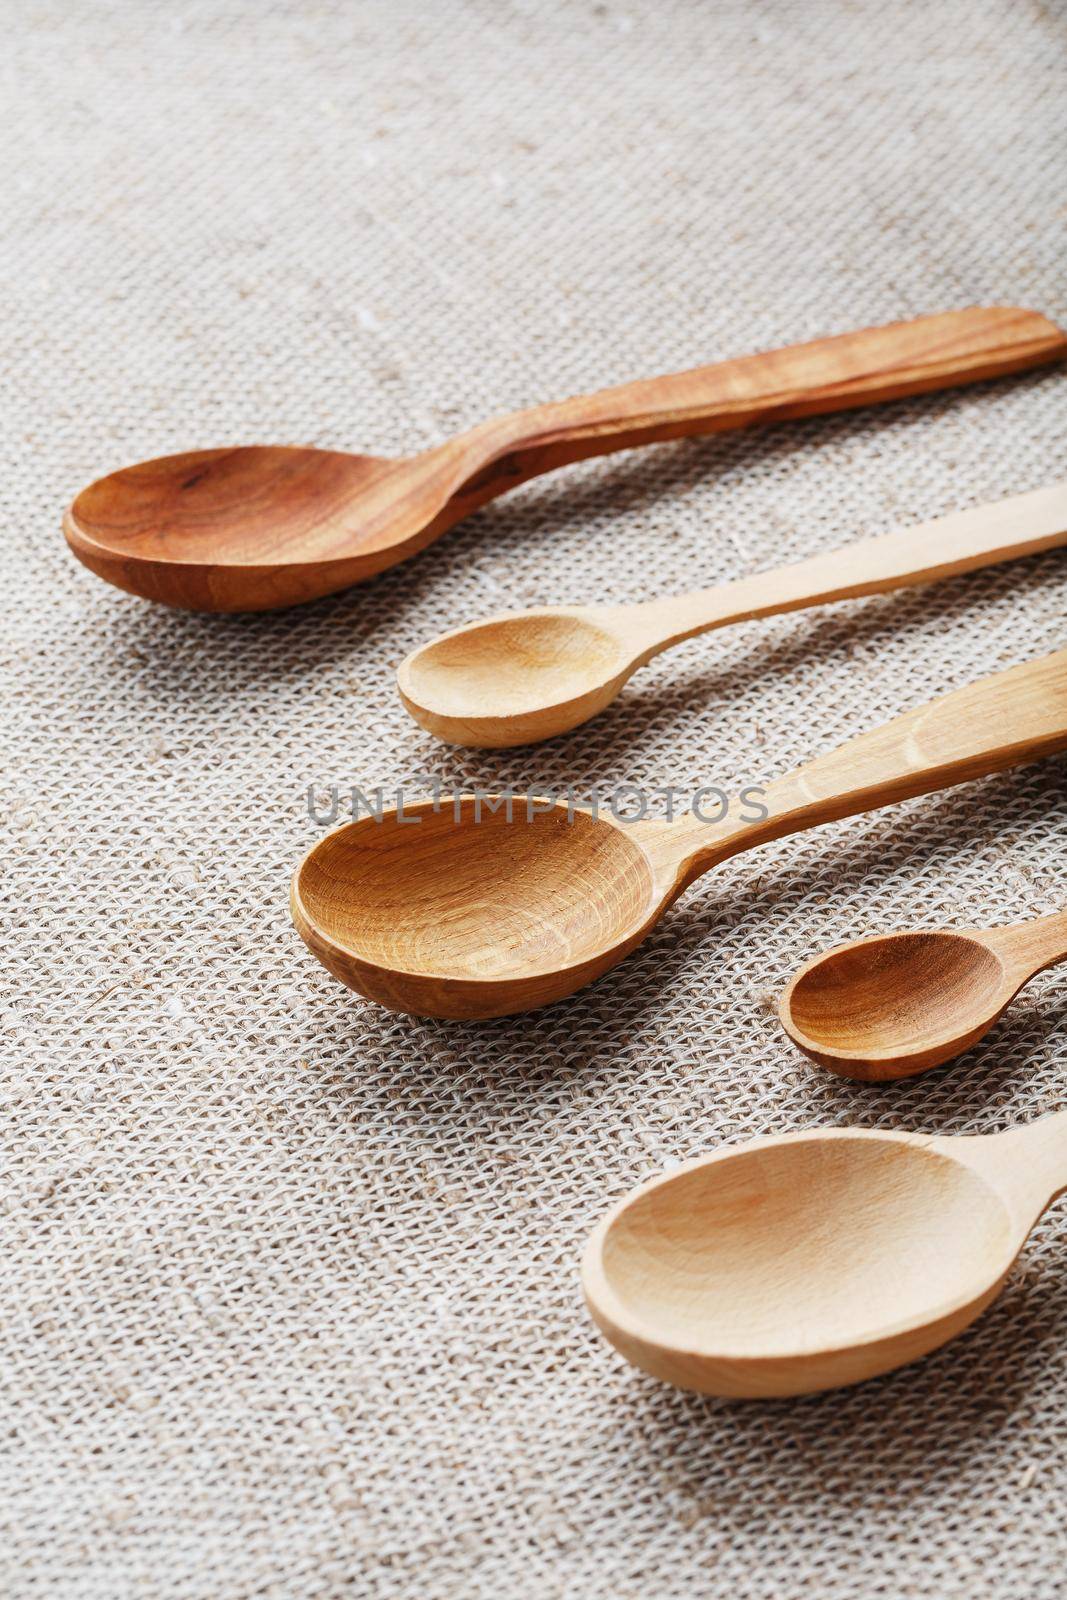 Craft spoons made from different types of wood lie in a row on a hemp burlap fabric